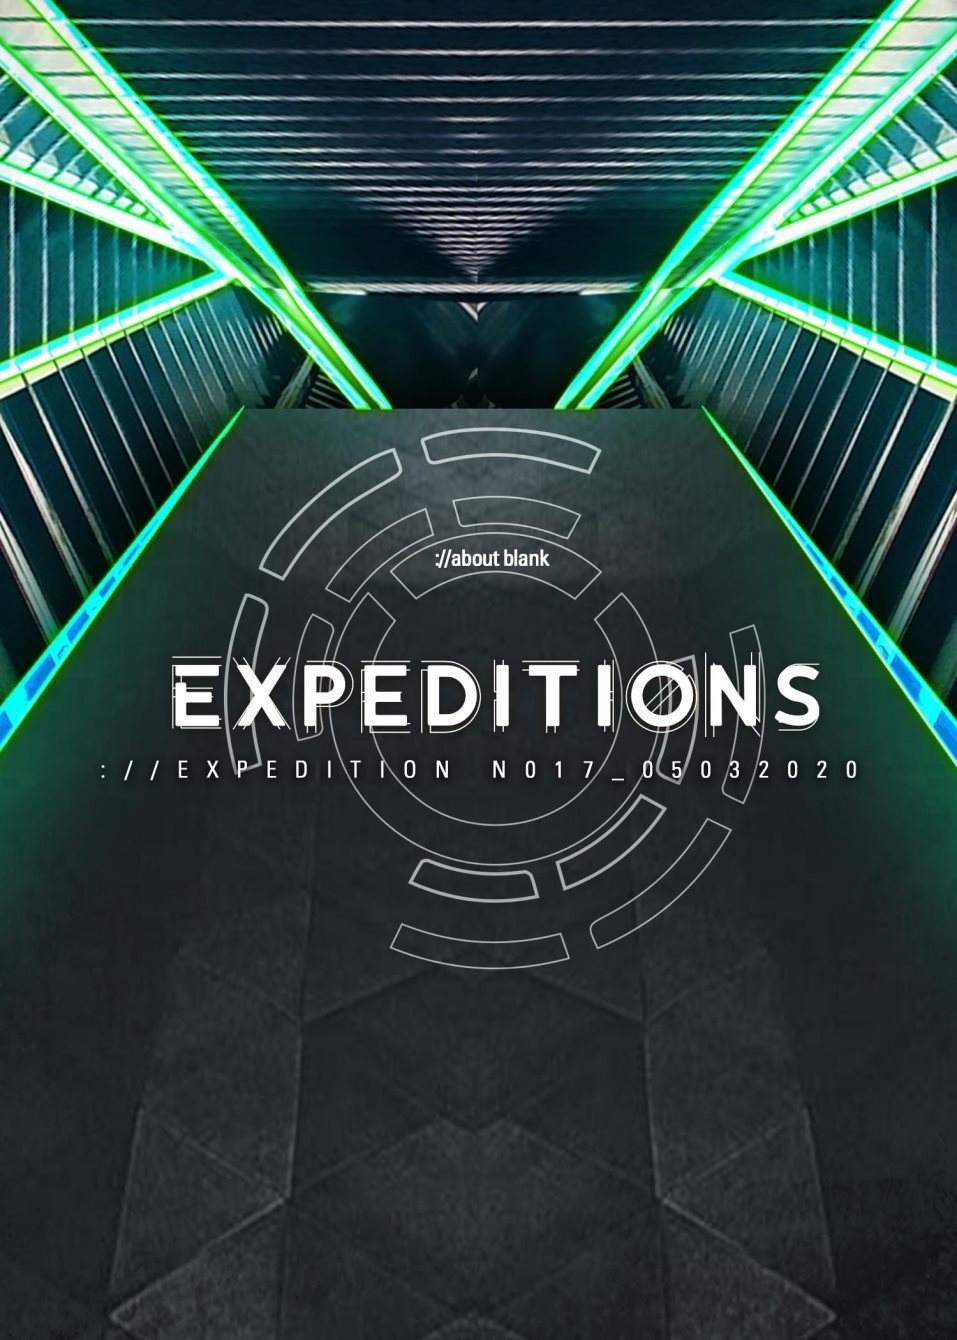 Expeditions N017 - フライヤー表